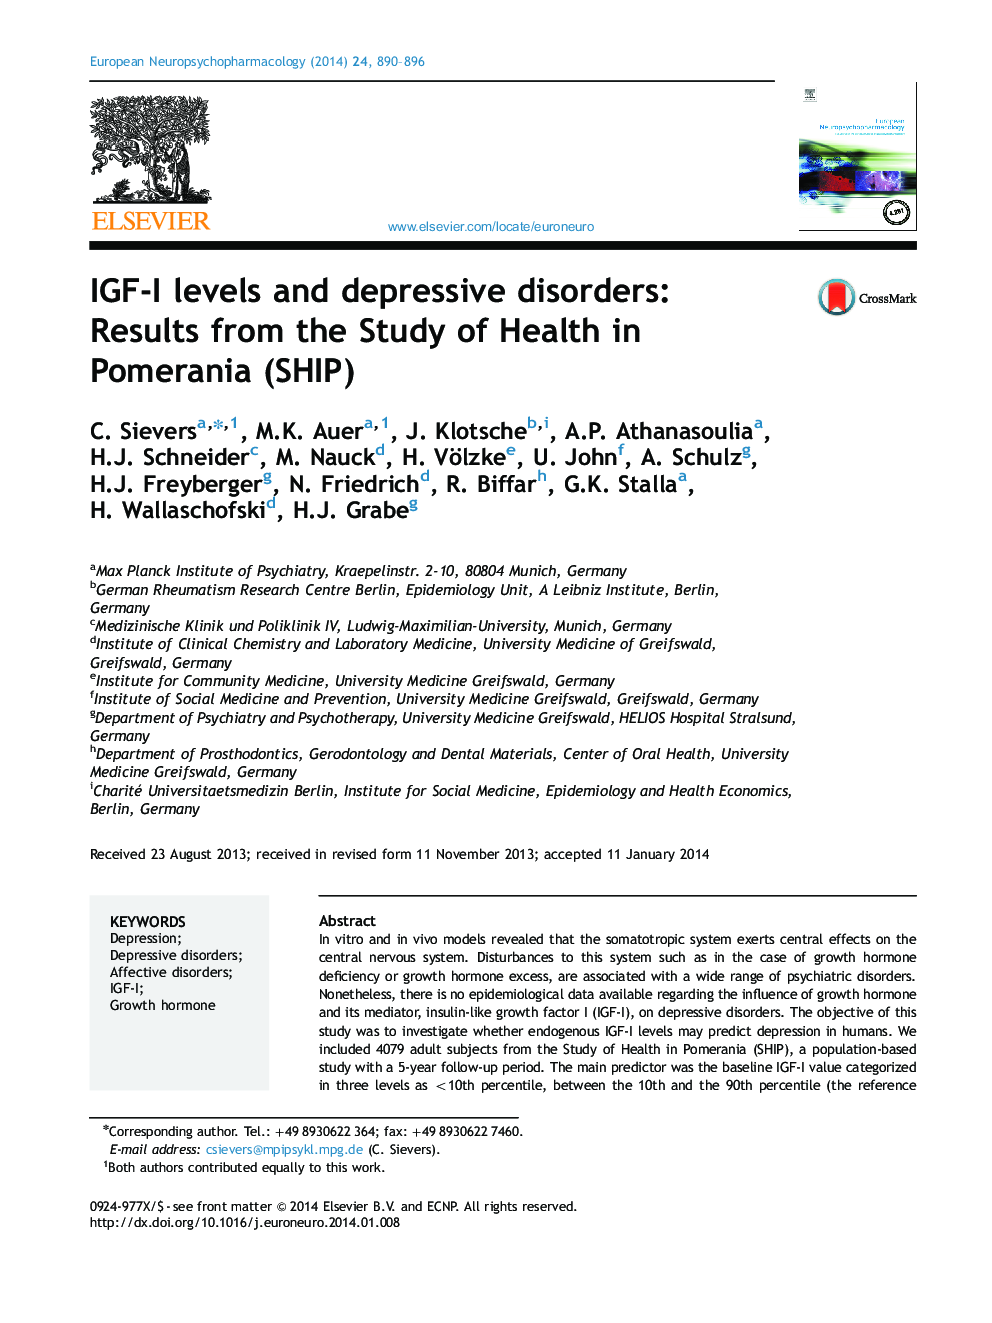 IGF-I levels and depressive disorders: Results from the Study of Health in Pomerania (SHIP)